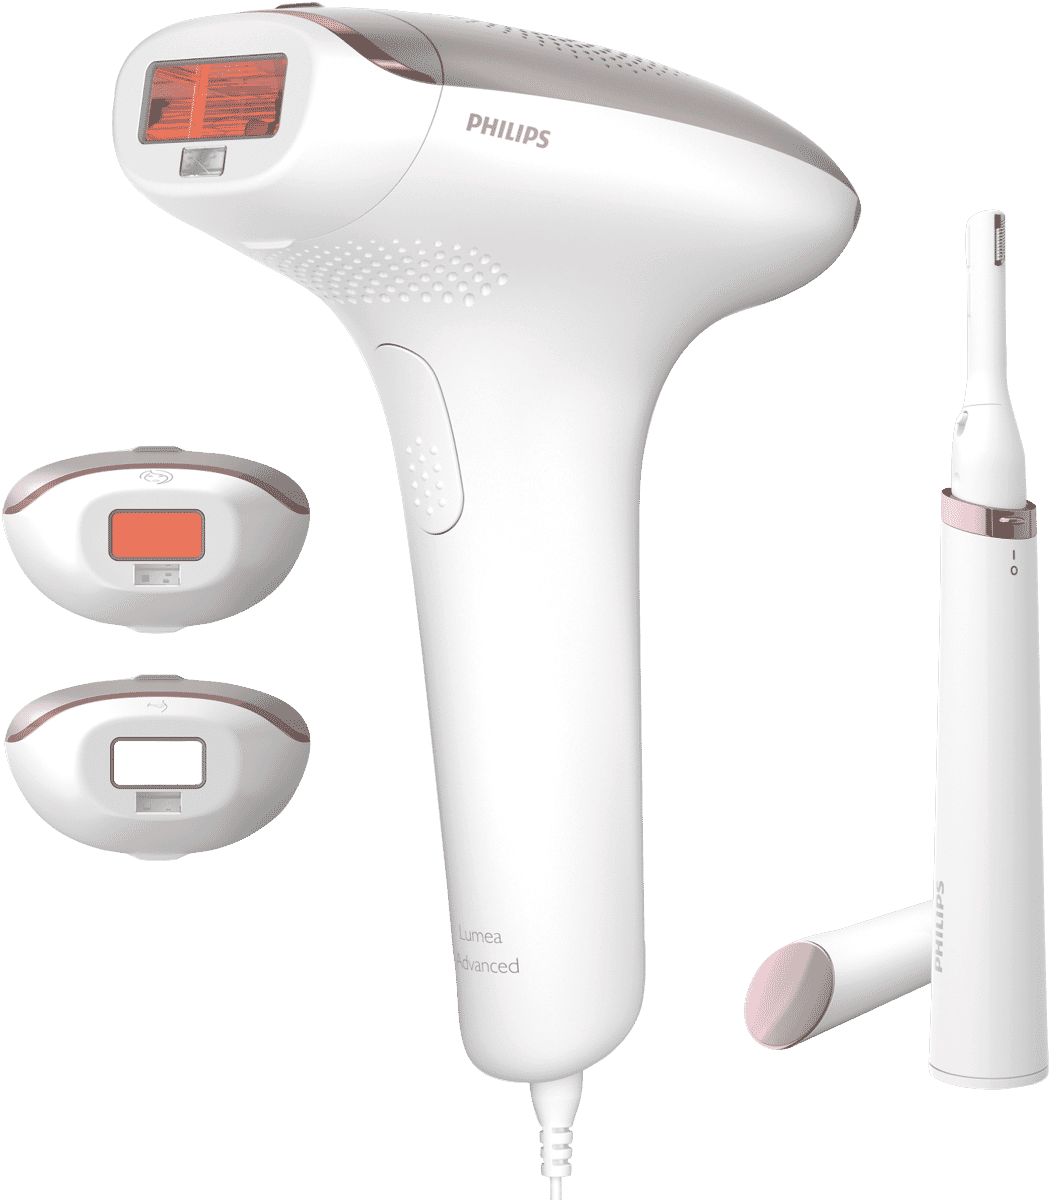 Frustration Governable wool Philips BRI923/00 Lumea Advanced IPL Hair Removal Device at The Good Guys